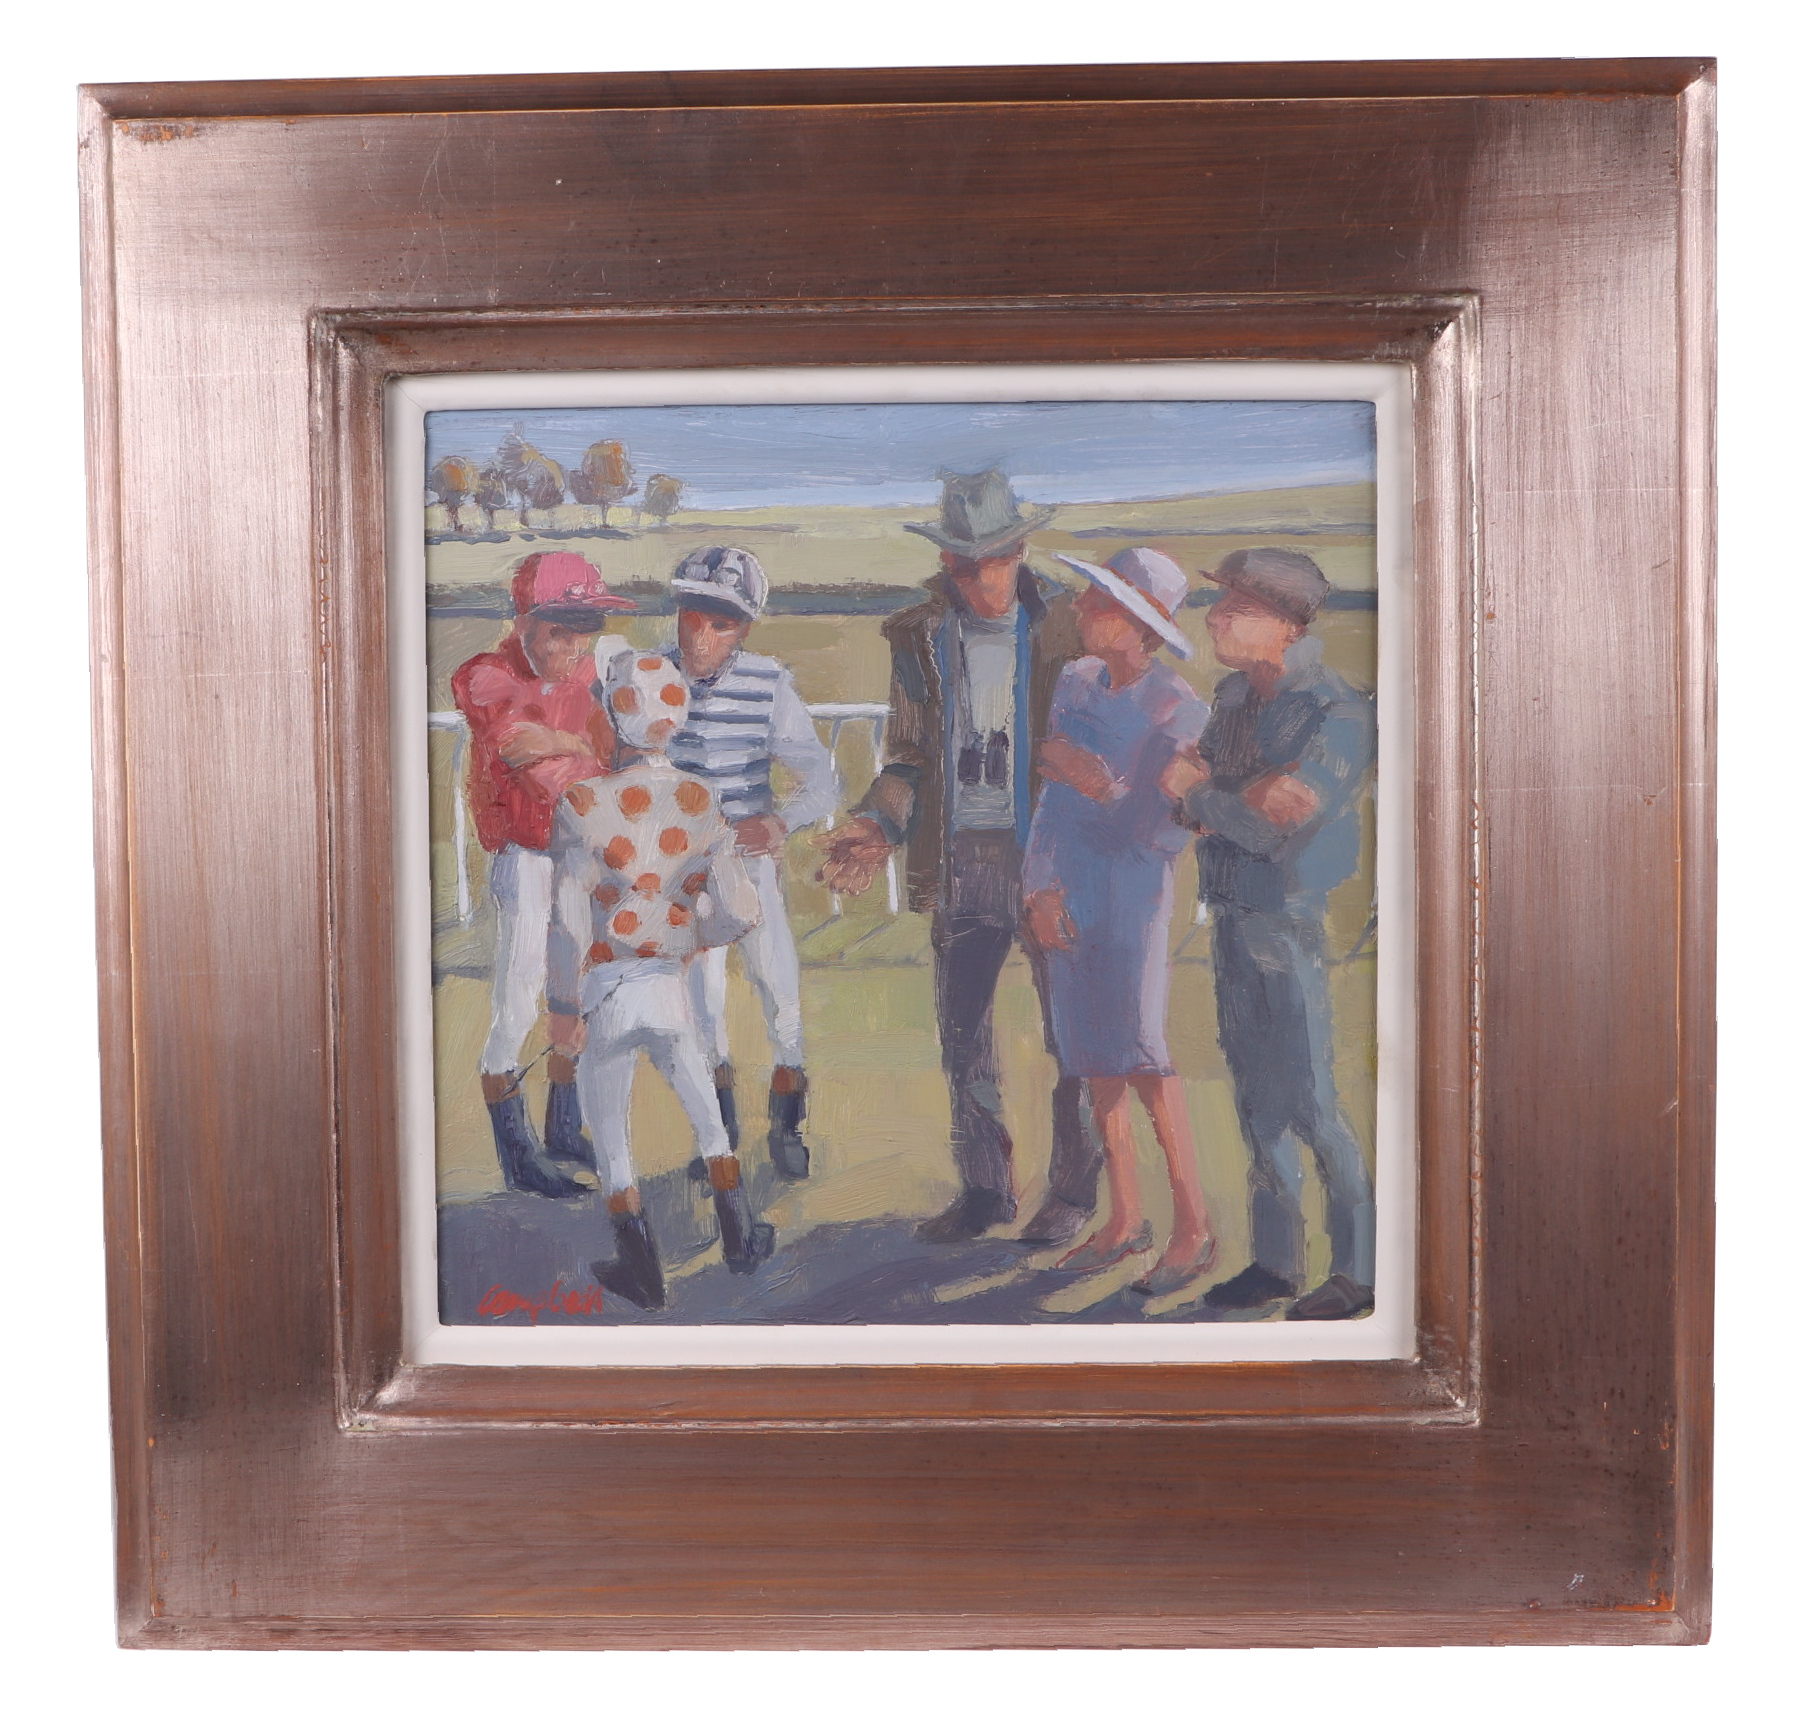 Campbell (Modern British), at the horse races in the paddock with owners and jockeys talking, oil on